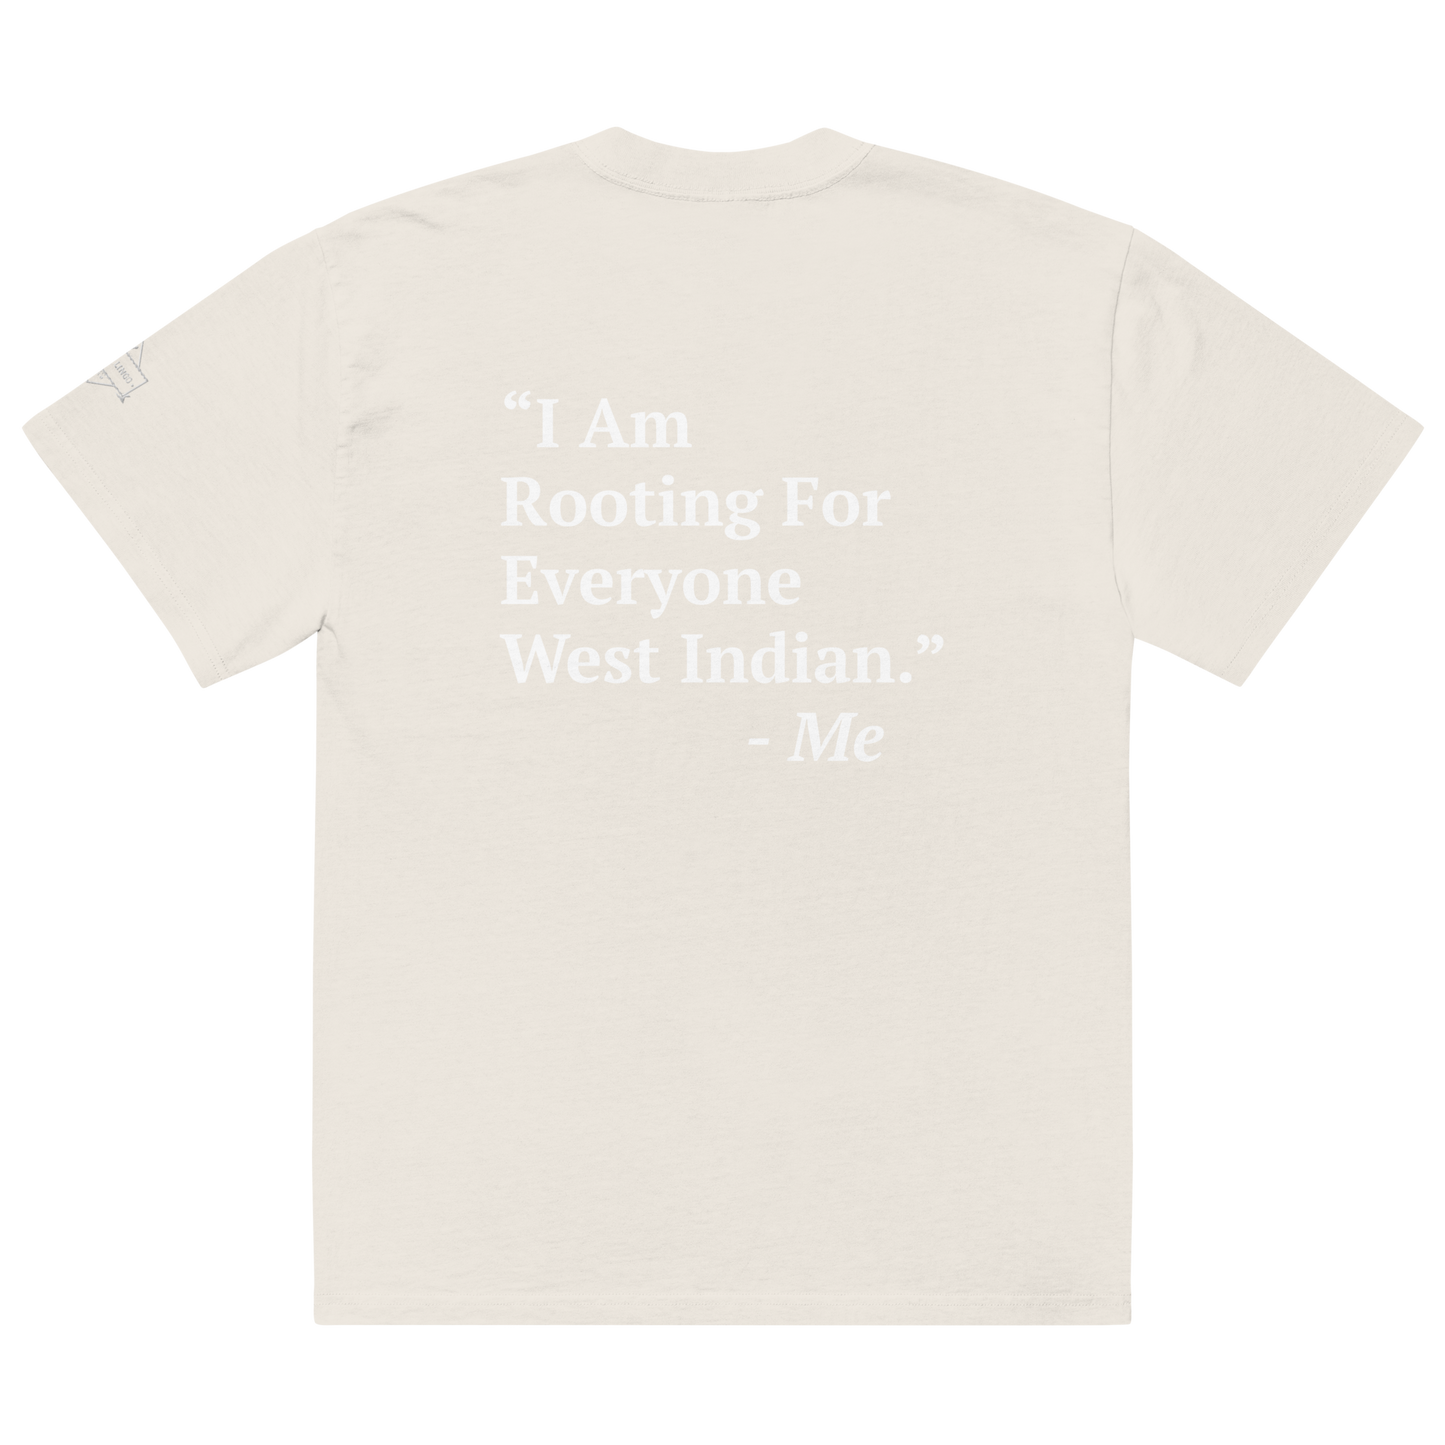 I Am Rooting: West Indian Oversized faded t-shirt